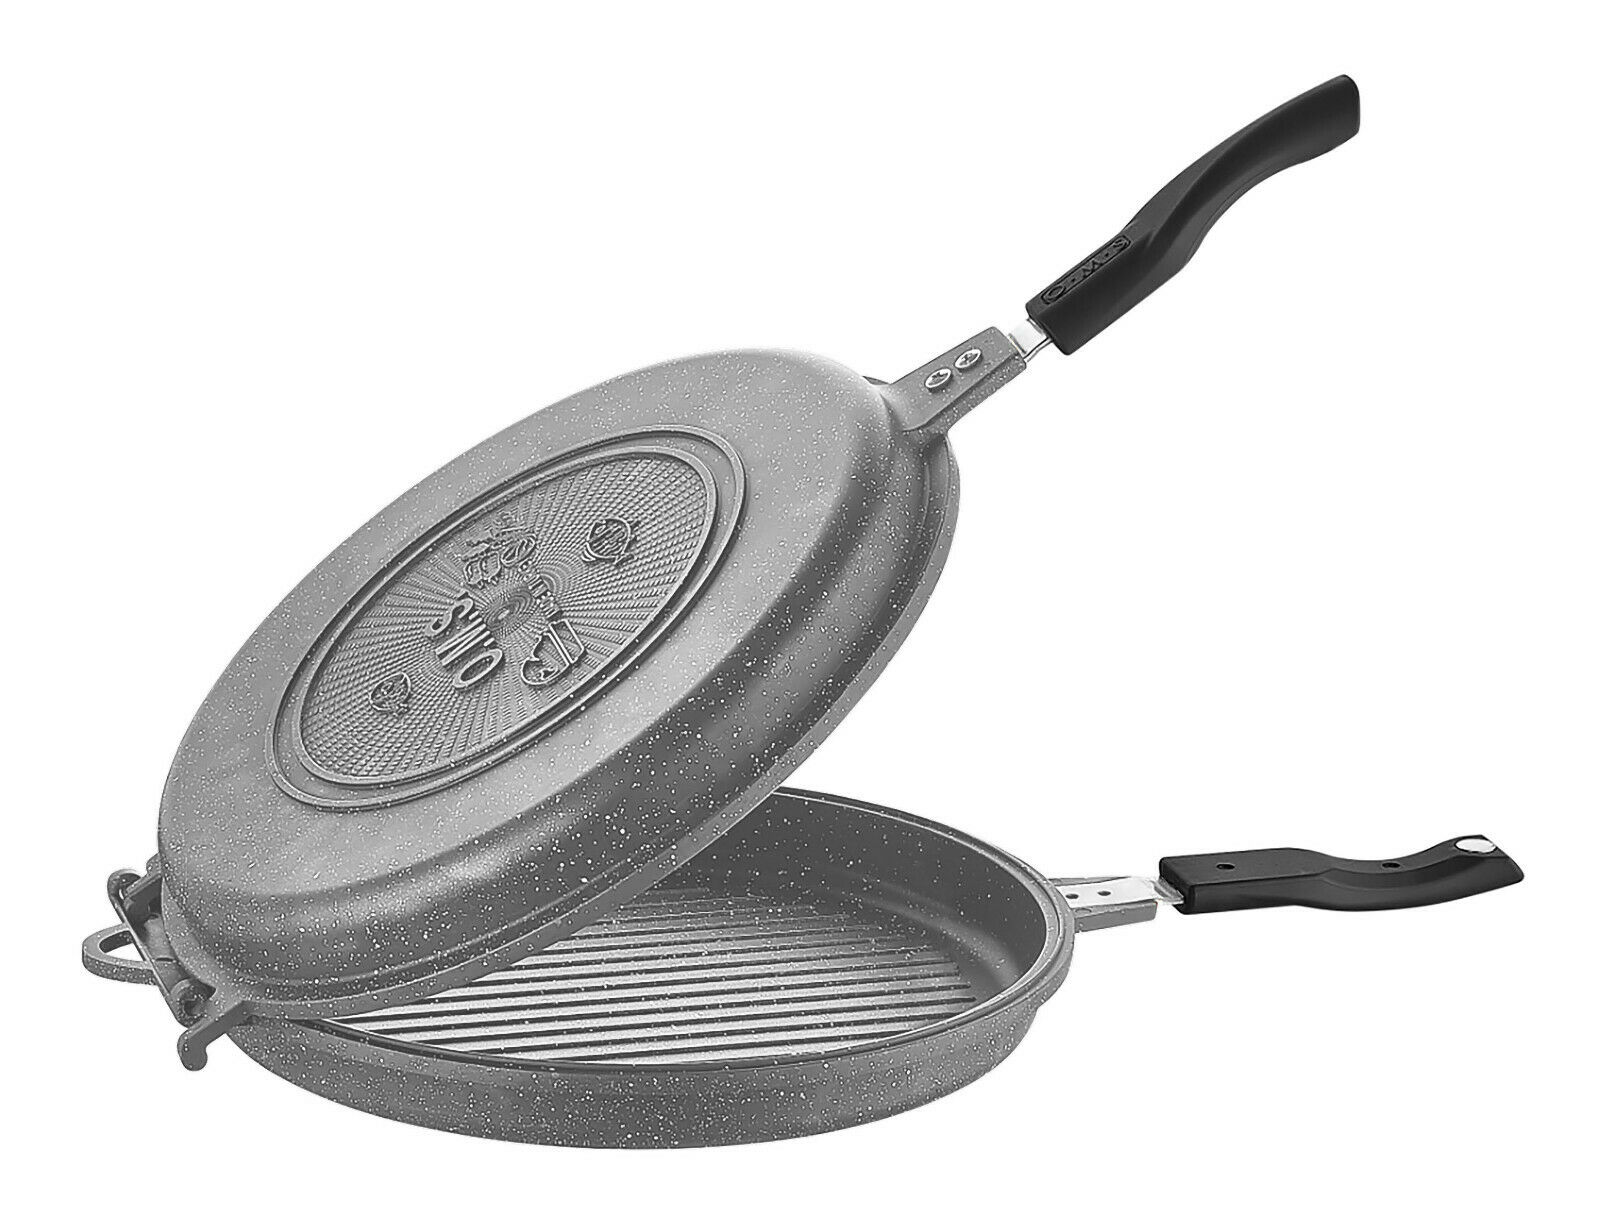 O.M.S. Granite Professional Double Sided Grill Pan Griddle Pan In Grey